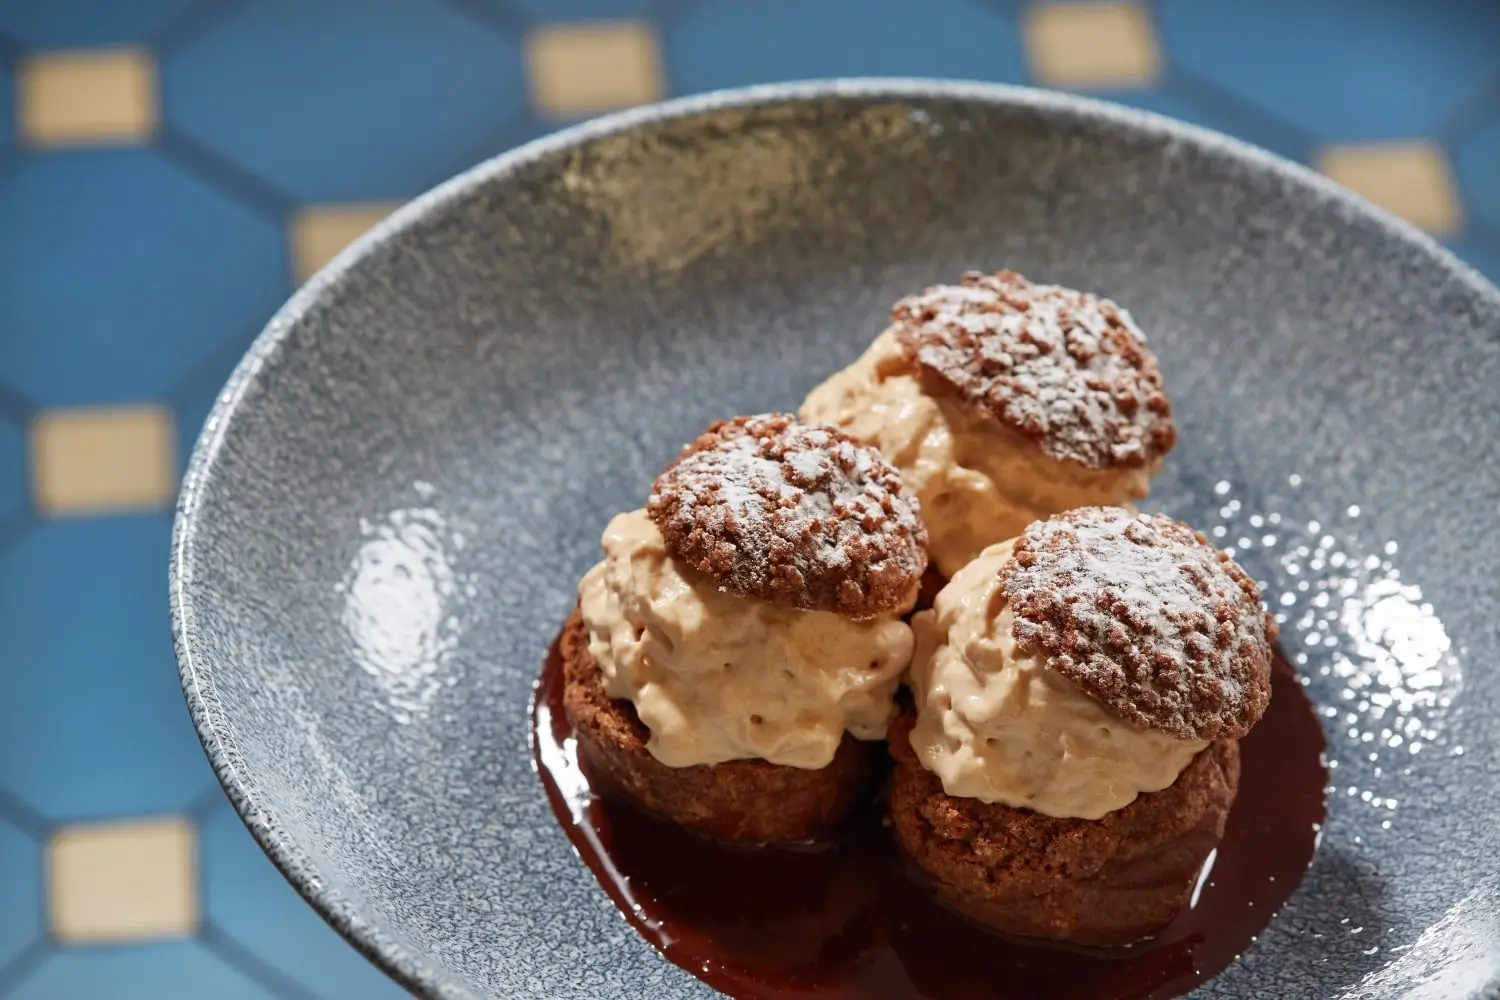 Gourmet profiteroles filled with cream and drizzled with chocolate sauce, served on a dark ceramic plate at Les Canailles Paris, ready to delight any dessert aficionado.